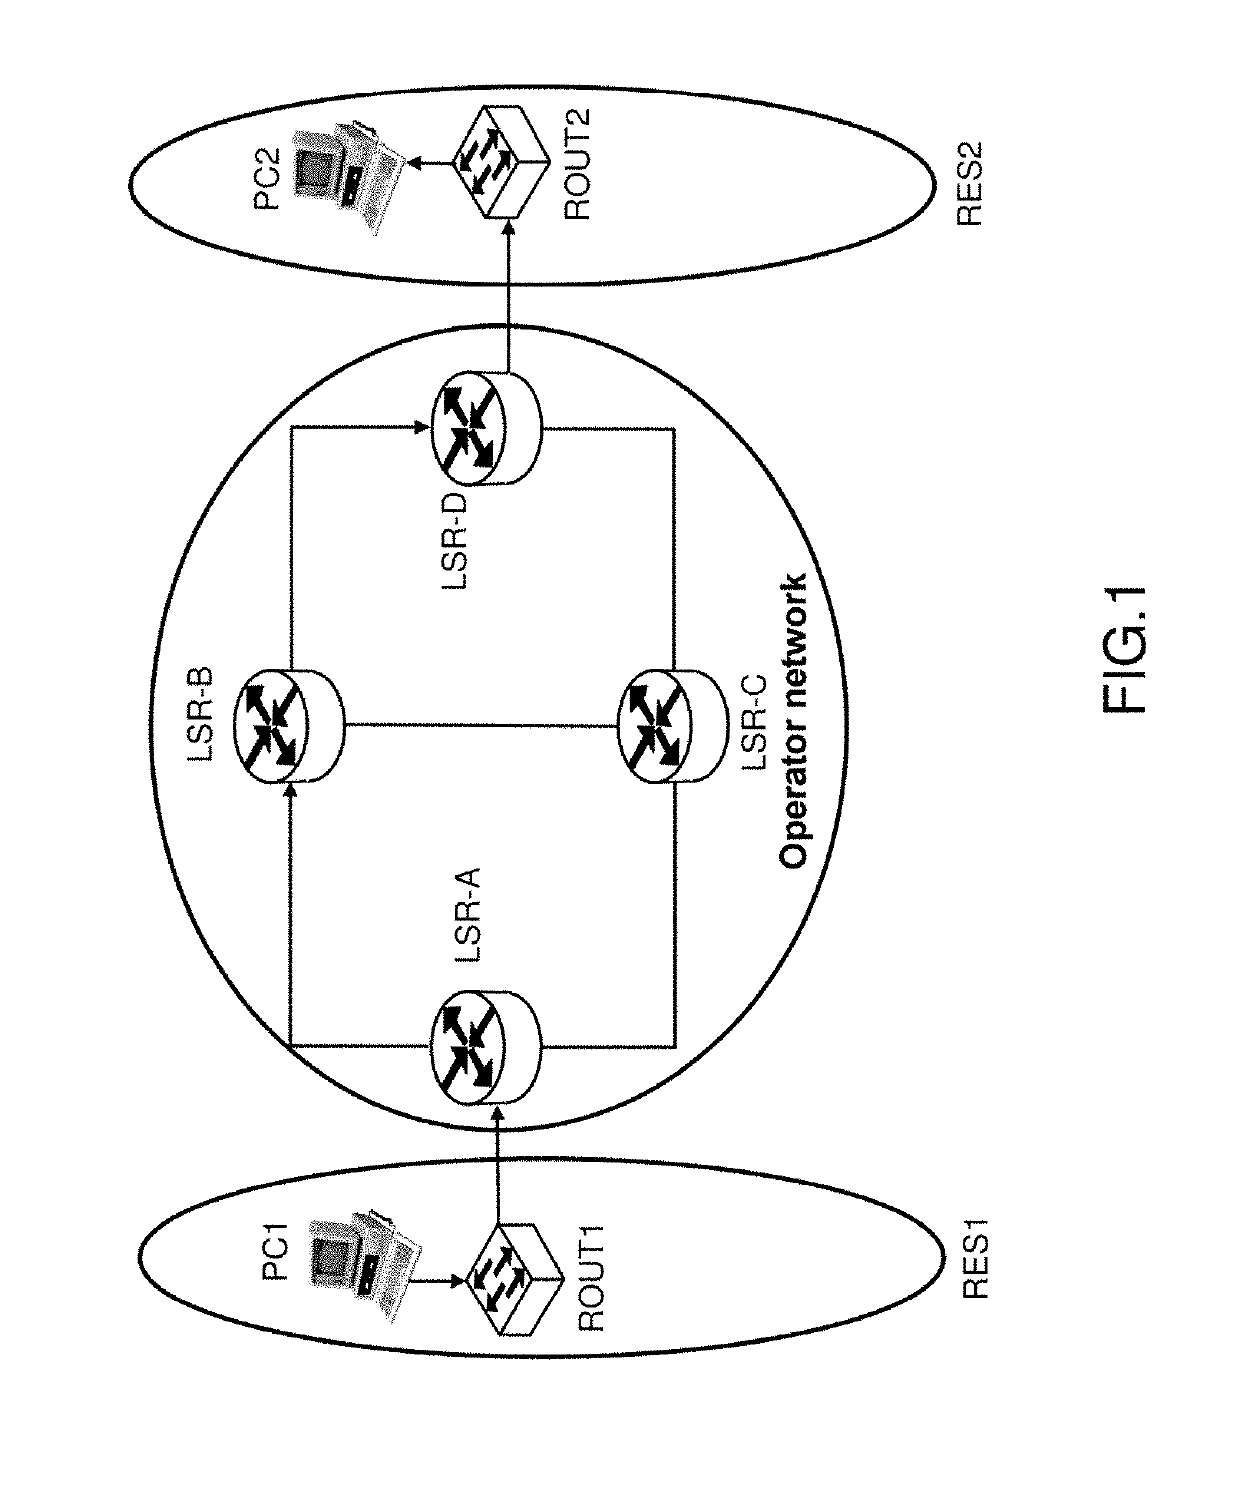 Method of optimizing spectral efficiency in an mpls interconnection context